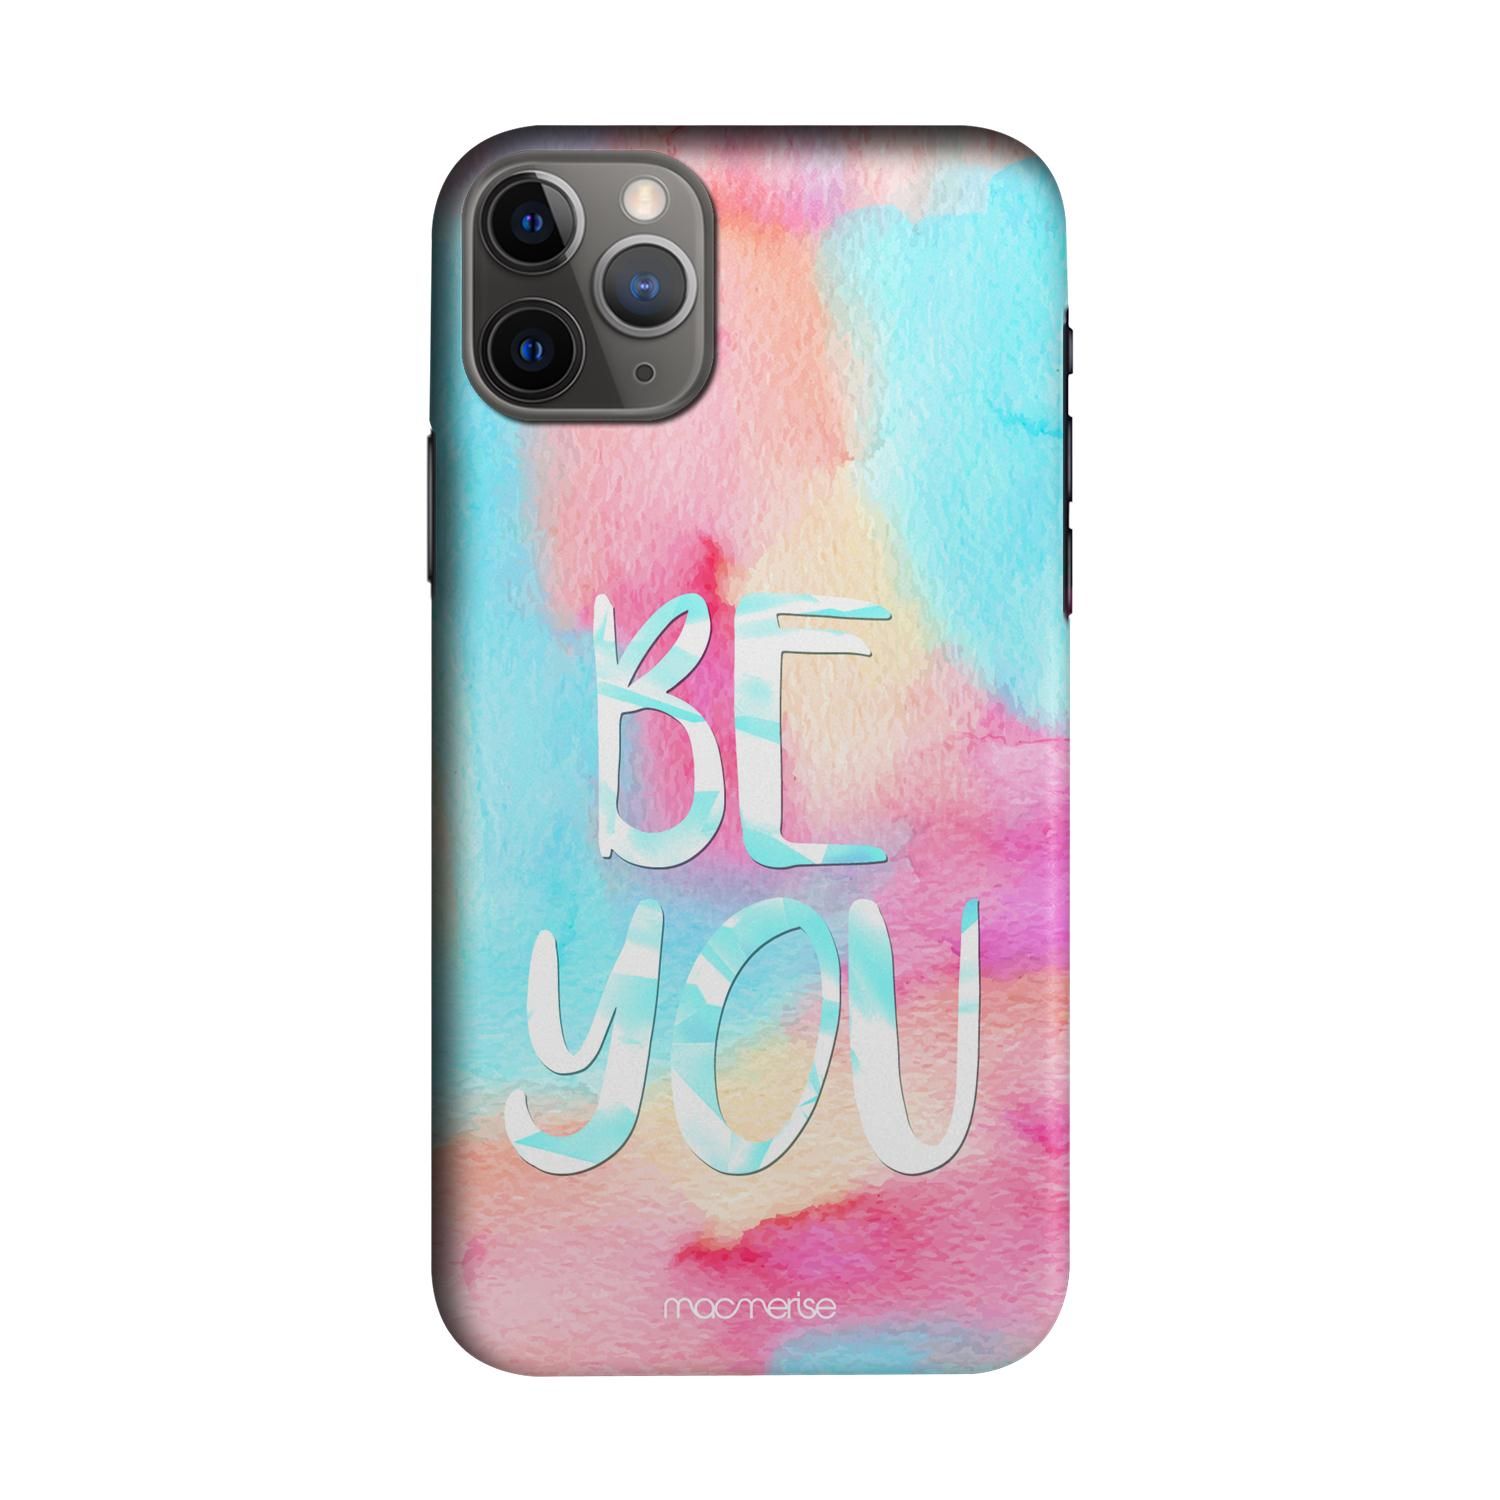 Be You - Sleek Phone Case for iPhone 11 Pro Max